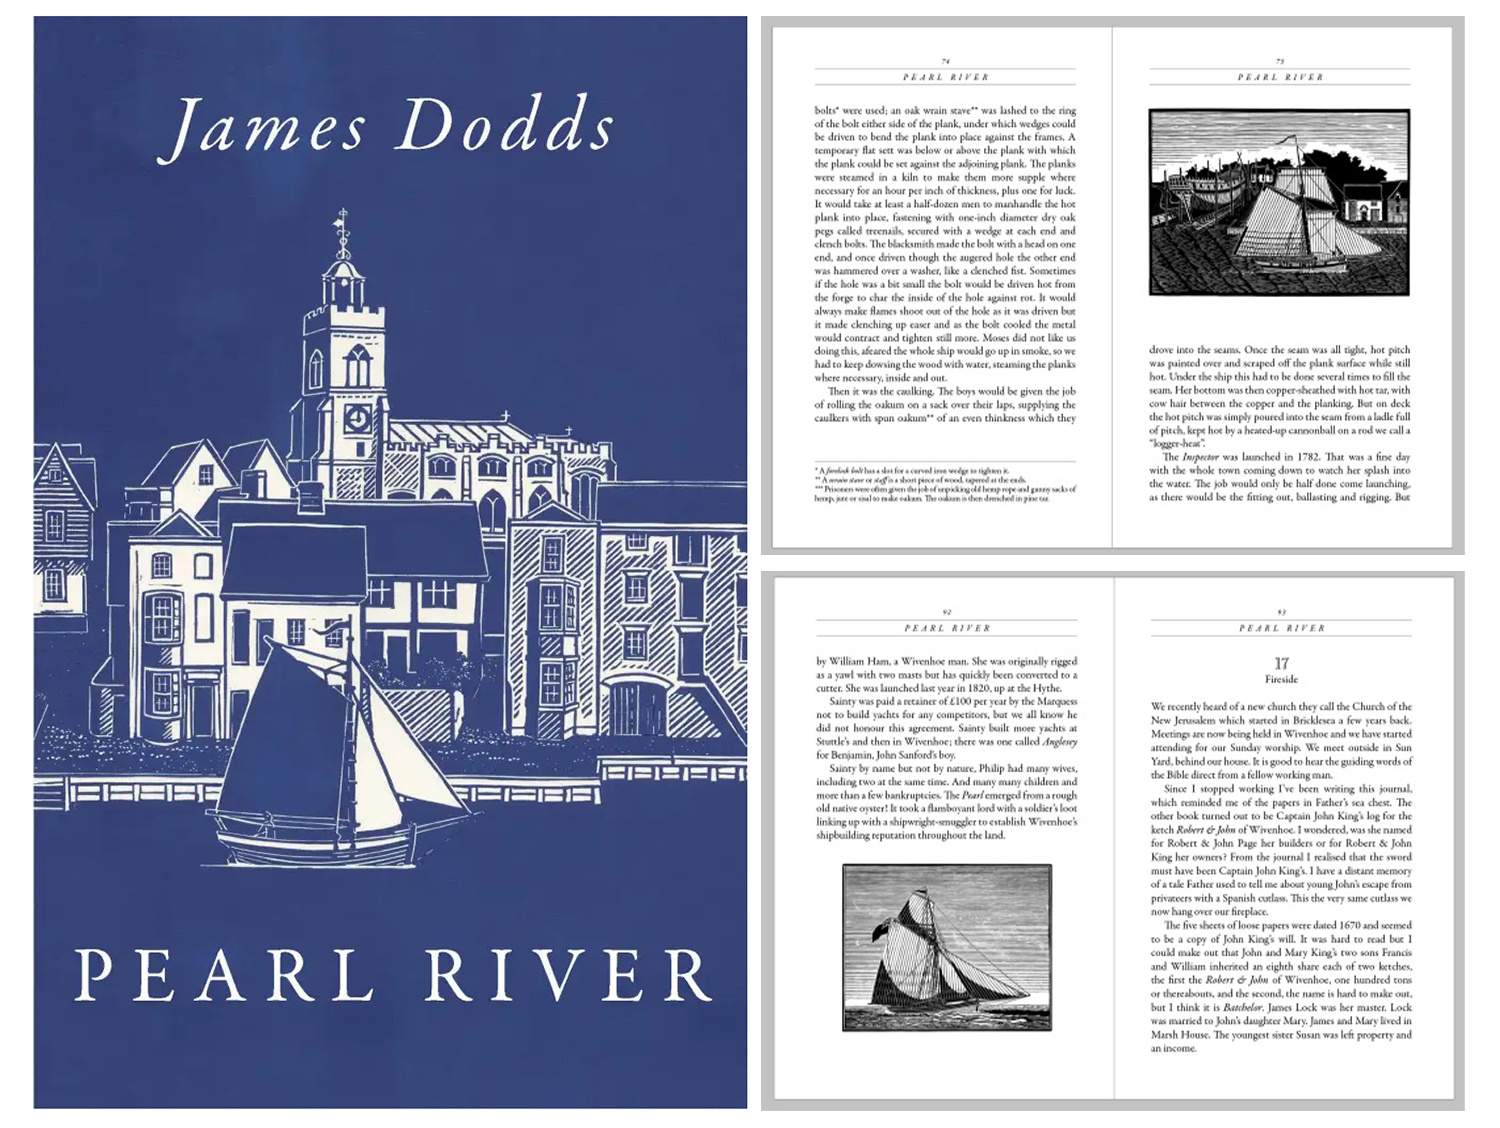 Pearl River by James Dodds